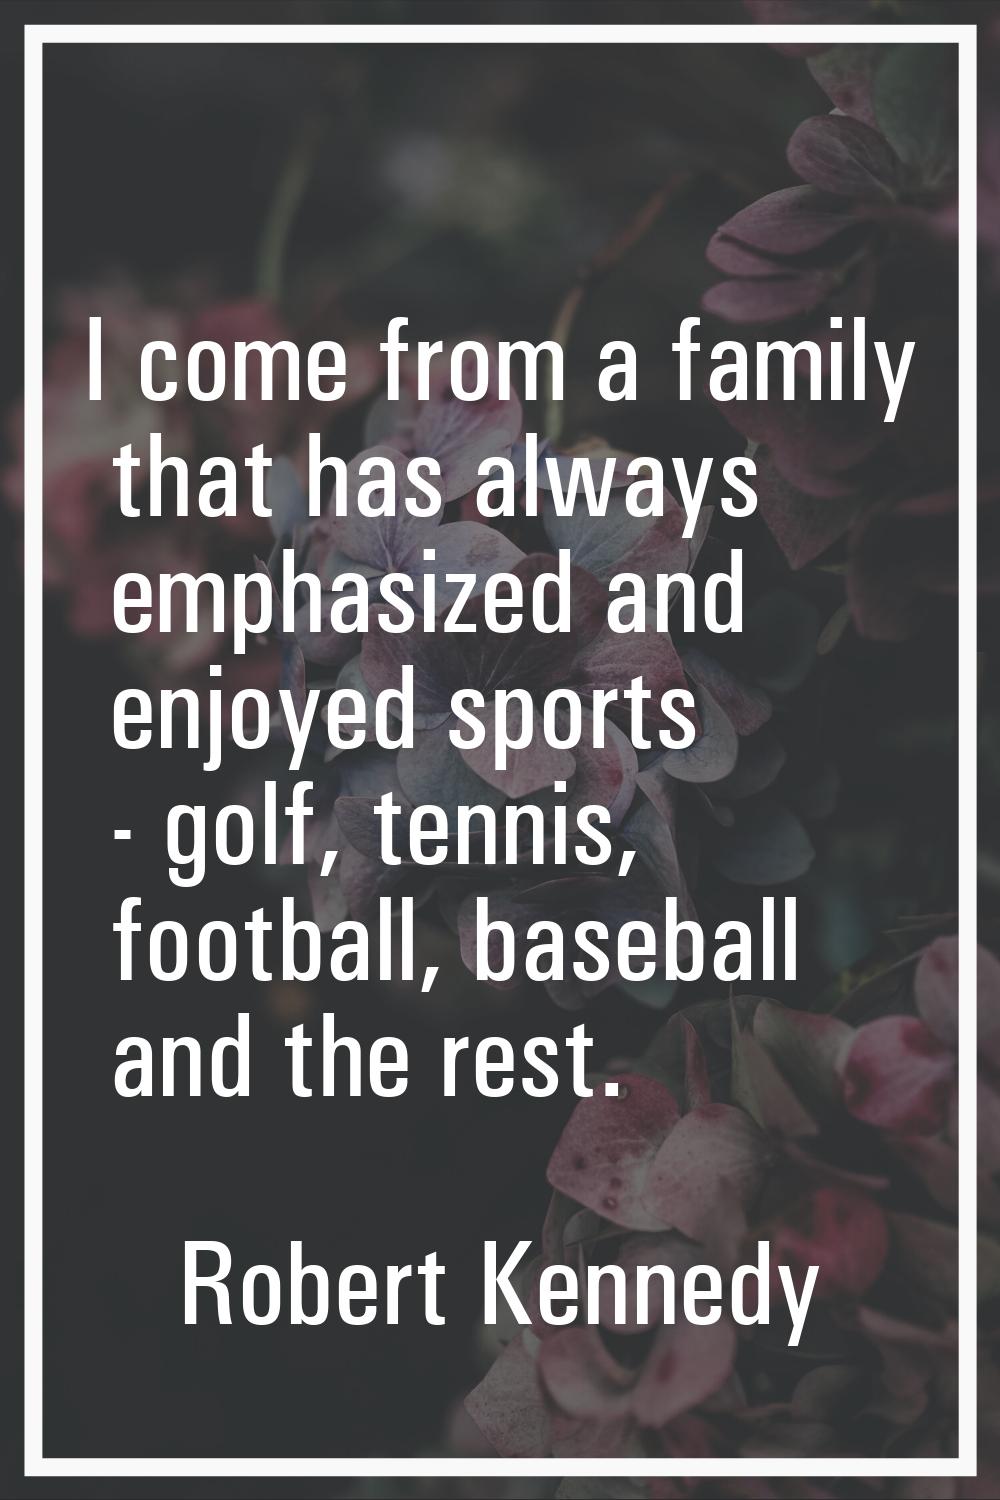 I come from a family that has always emphasized and enjoyed sports - golf, tennis, football, baseba